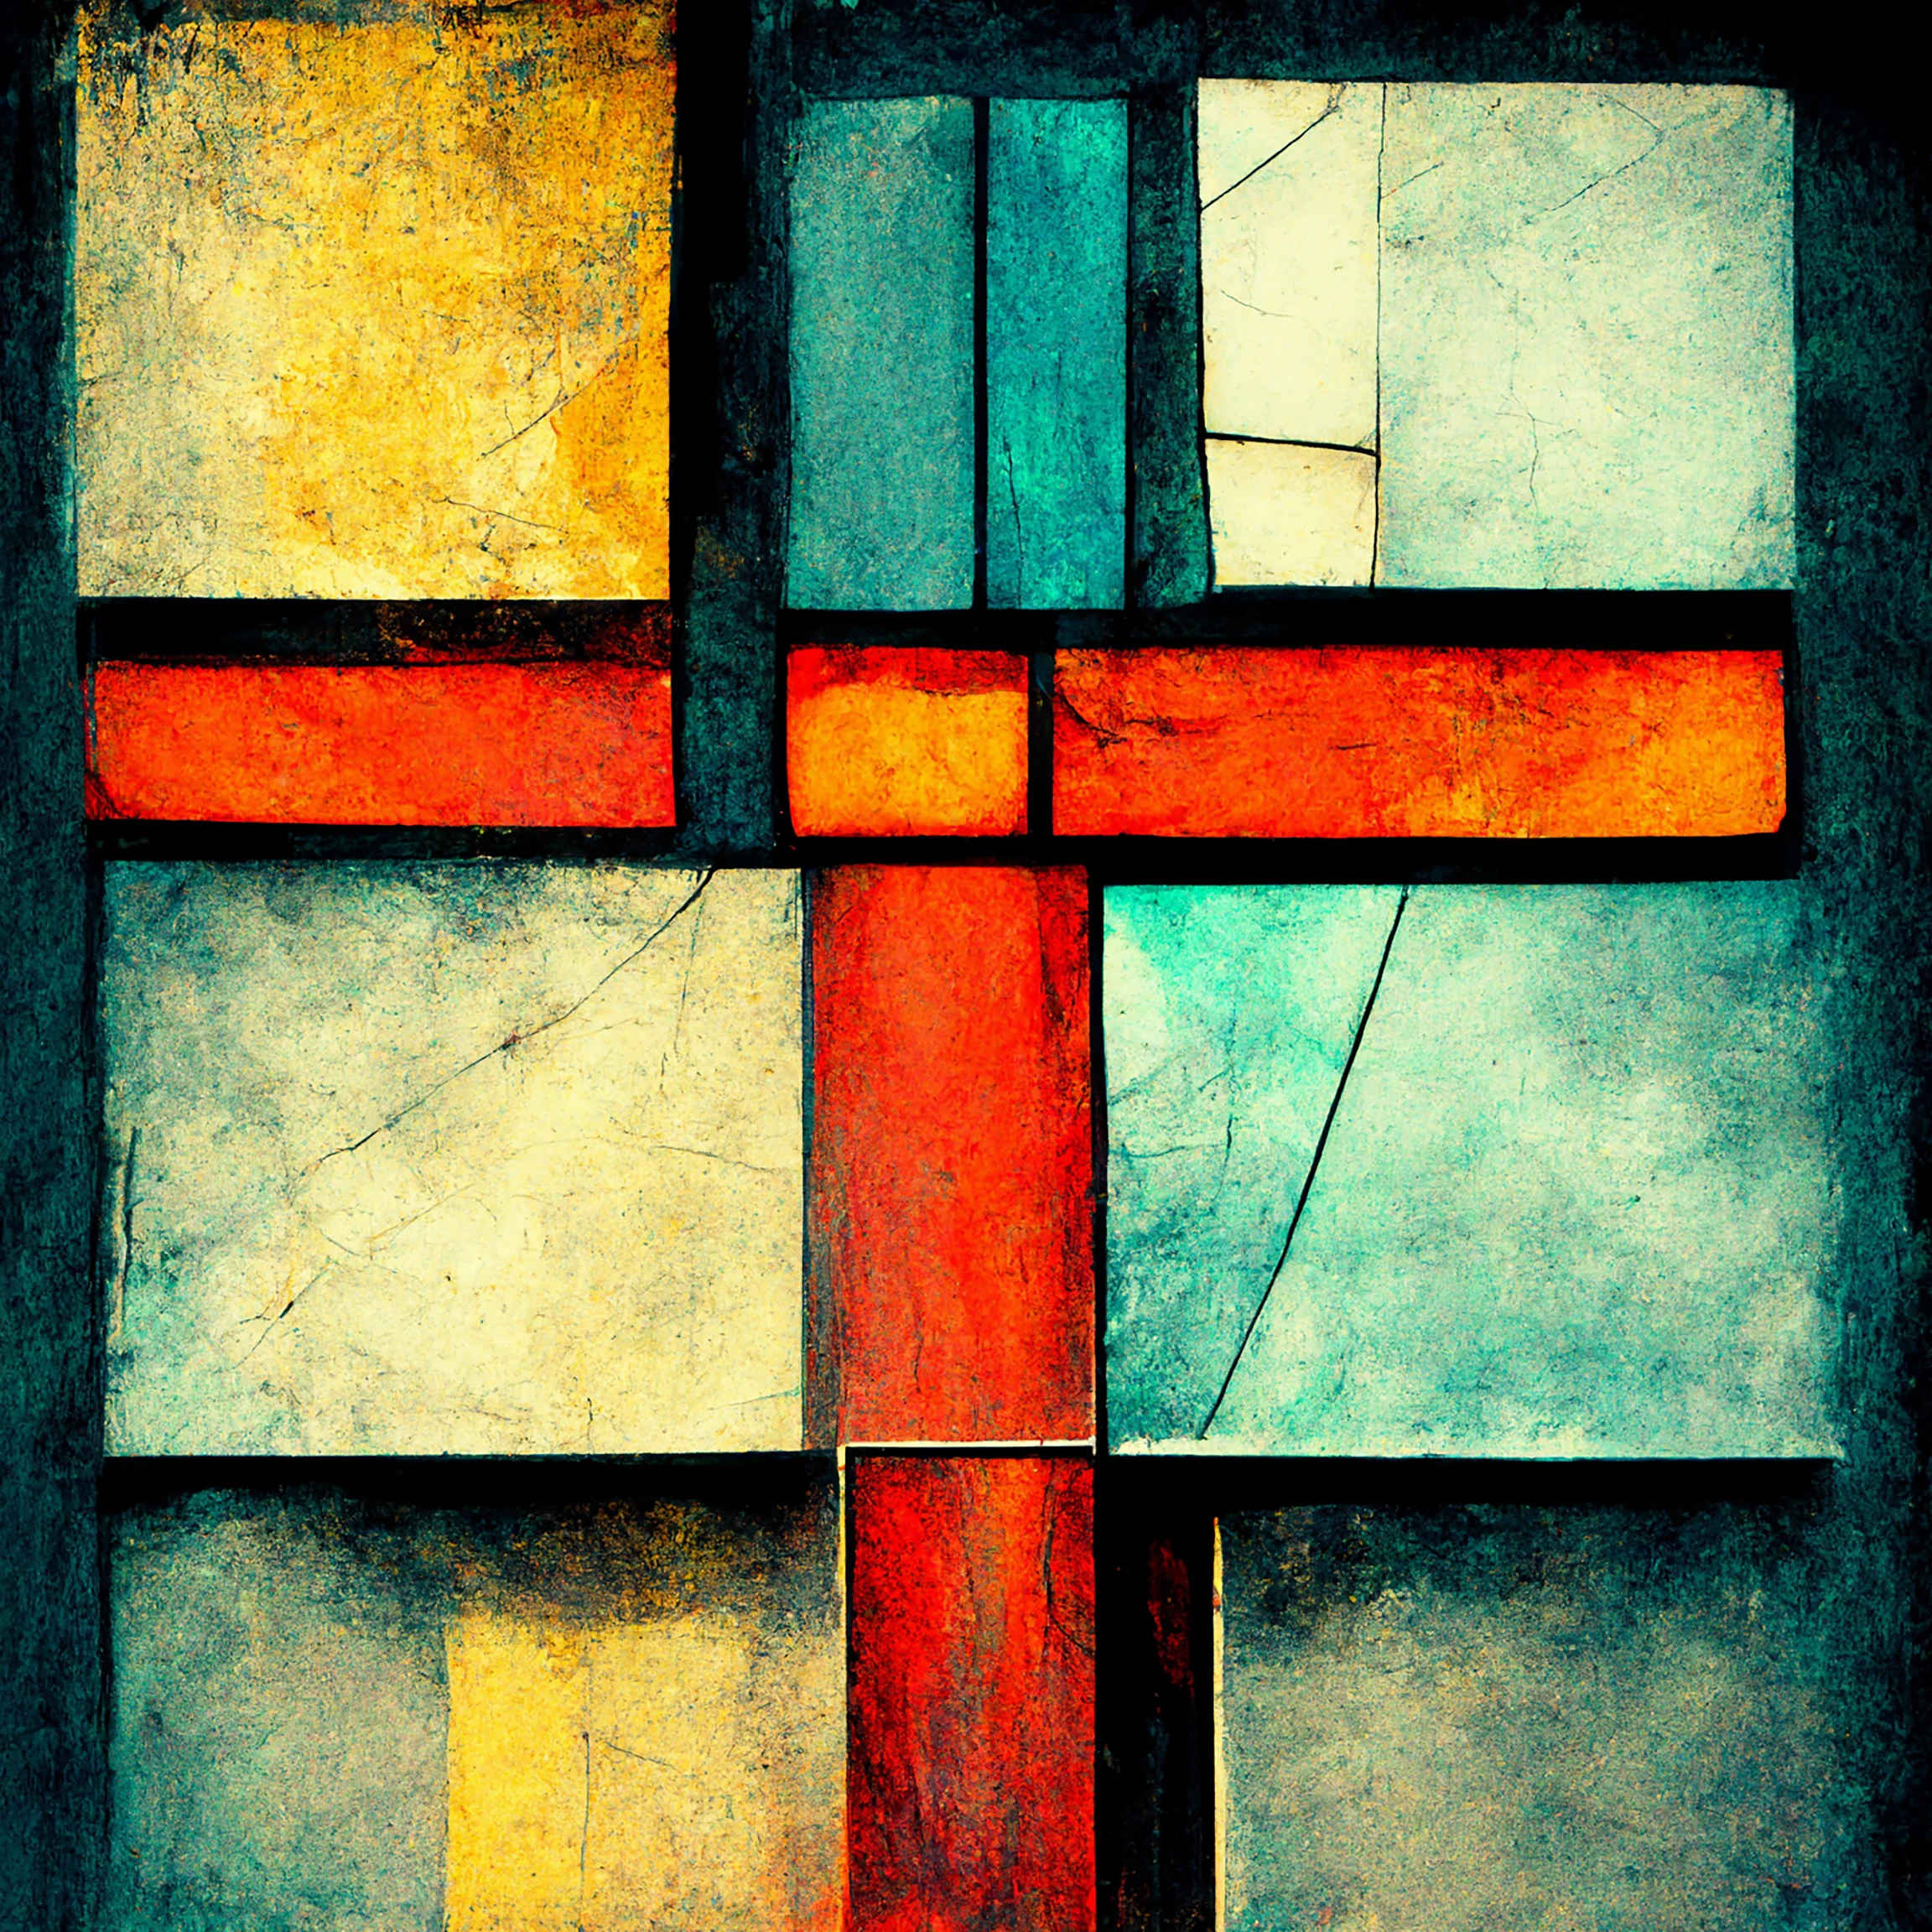 stephentalla religious abstract stained glass cross God surreal b8696ccd cb02 4bdf b9ec cb8fbc202f8f jpg A Textual Analysis on Luis G. Dato's "The Spouse": A Biblical Approach